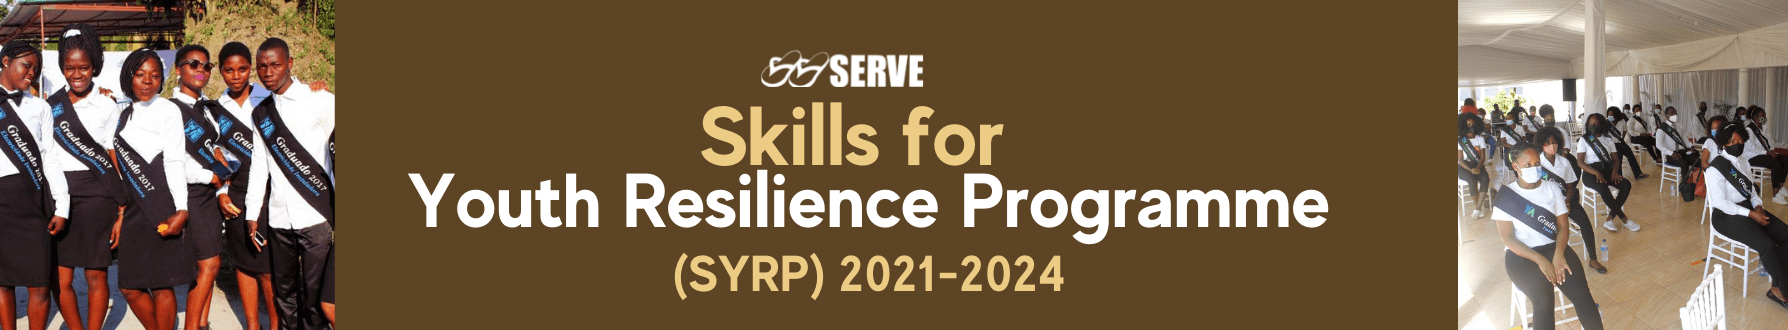 Skills for Youth Resilience Programme SYRP Young Africa Banner